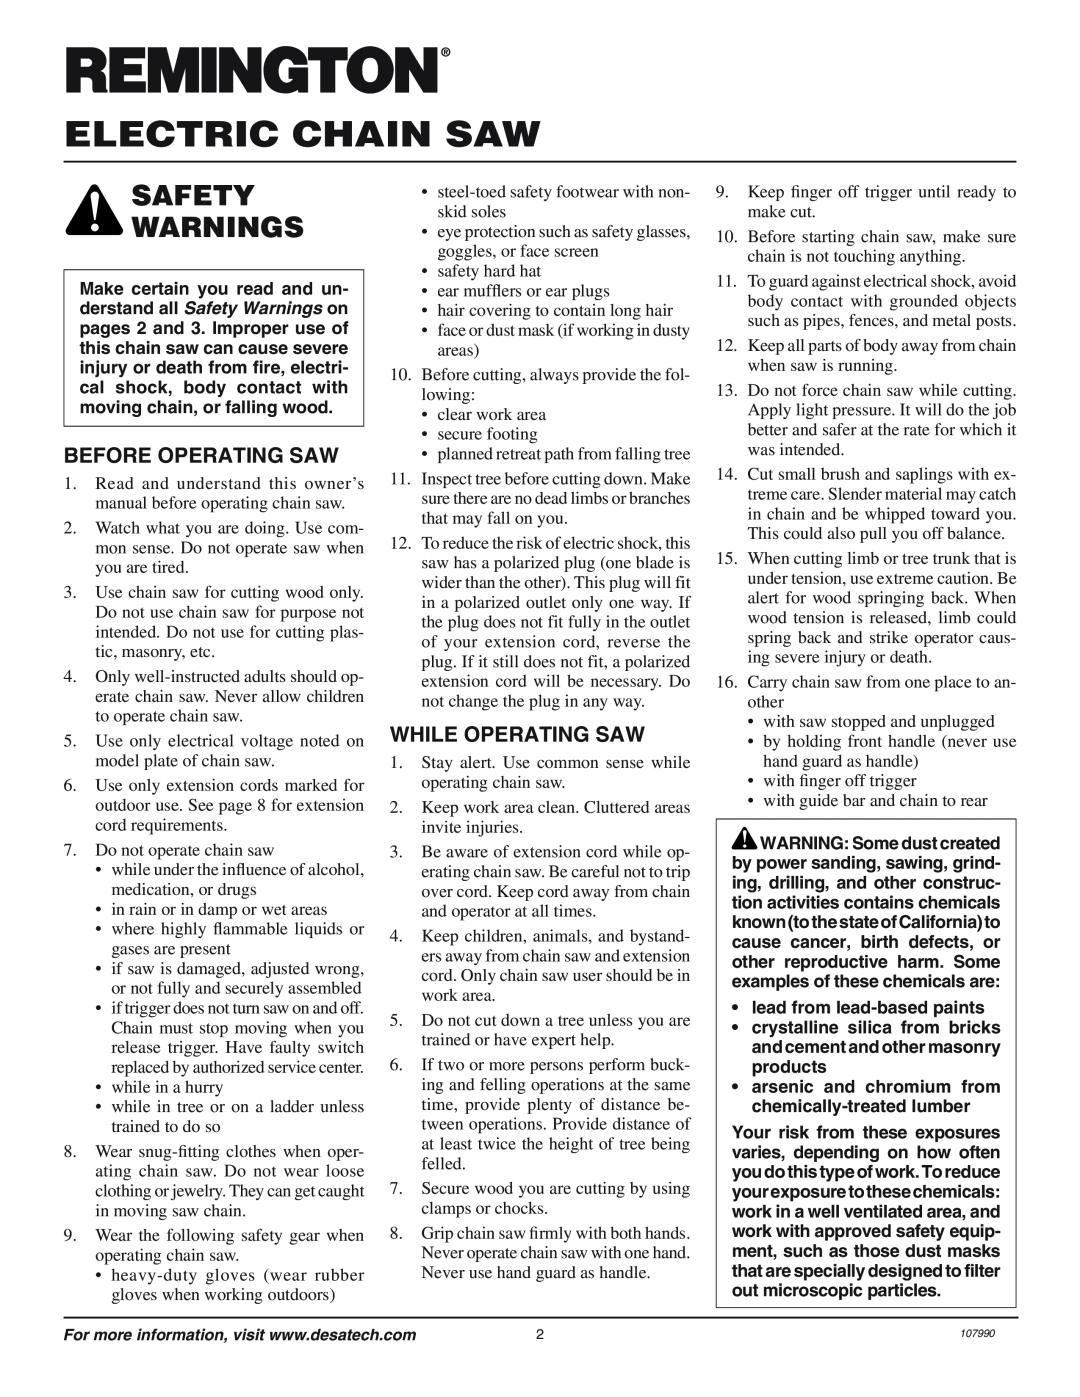 Remington owner manual Electric Chain Saw, Safety Warnings, Before Operating Saw, While Operating Saw 